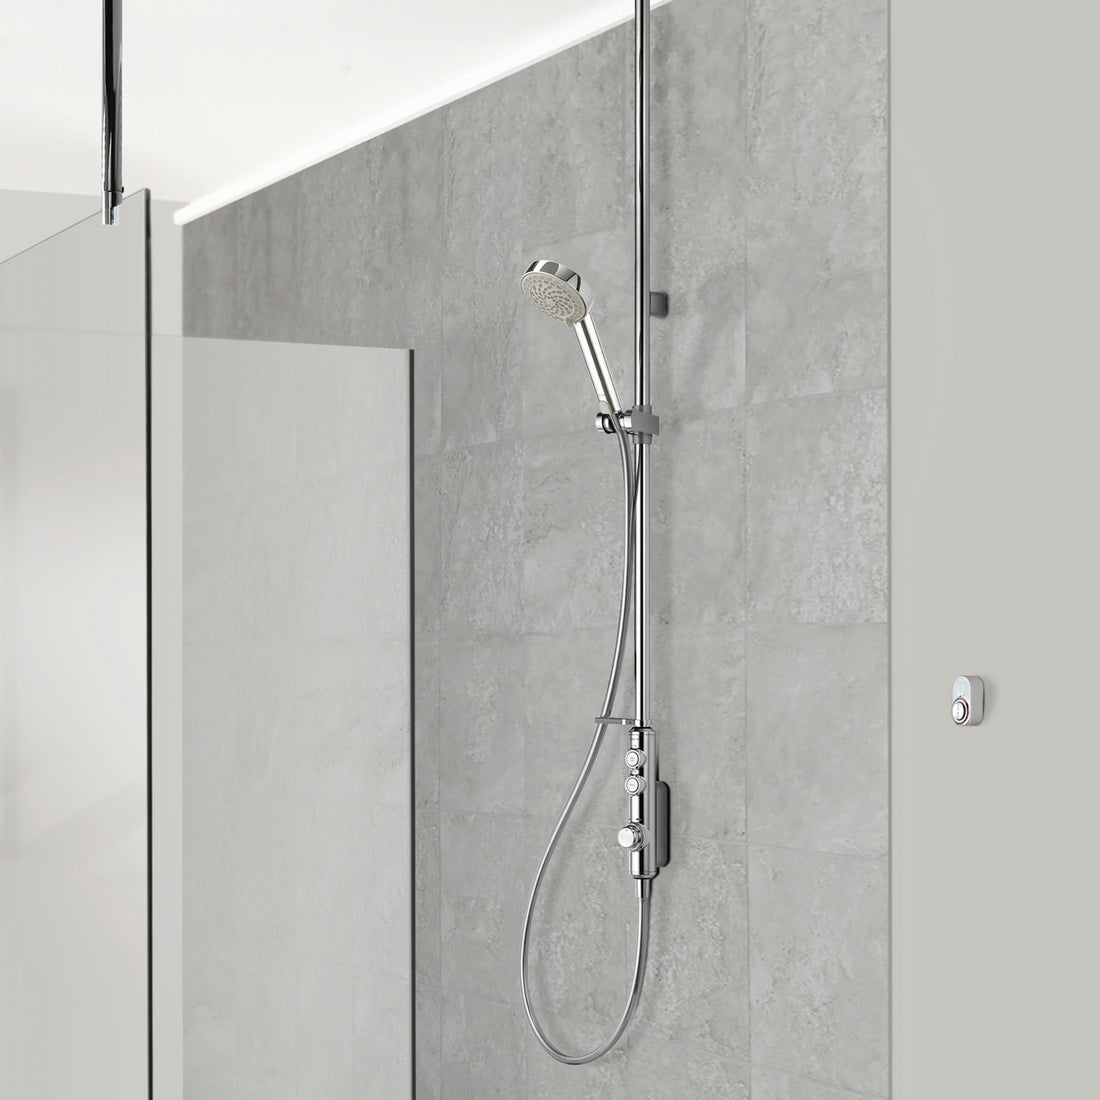 Aqualisa Isystem Smart Shower - Exposed With Adjustable Head against a light grey wall panel ISD.A1.EV.21